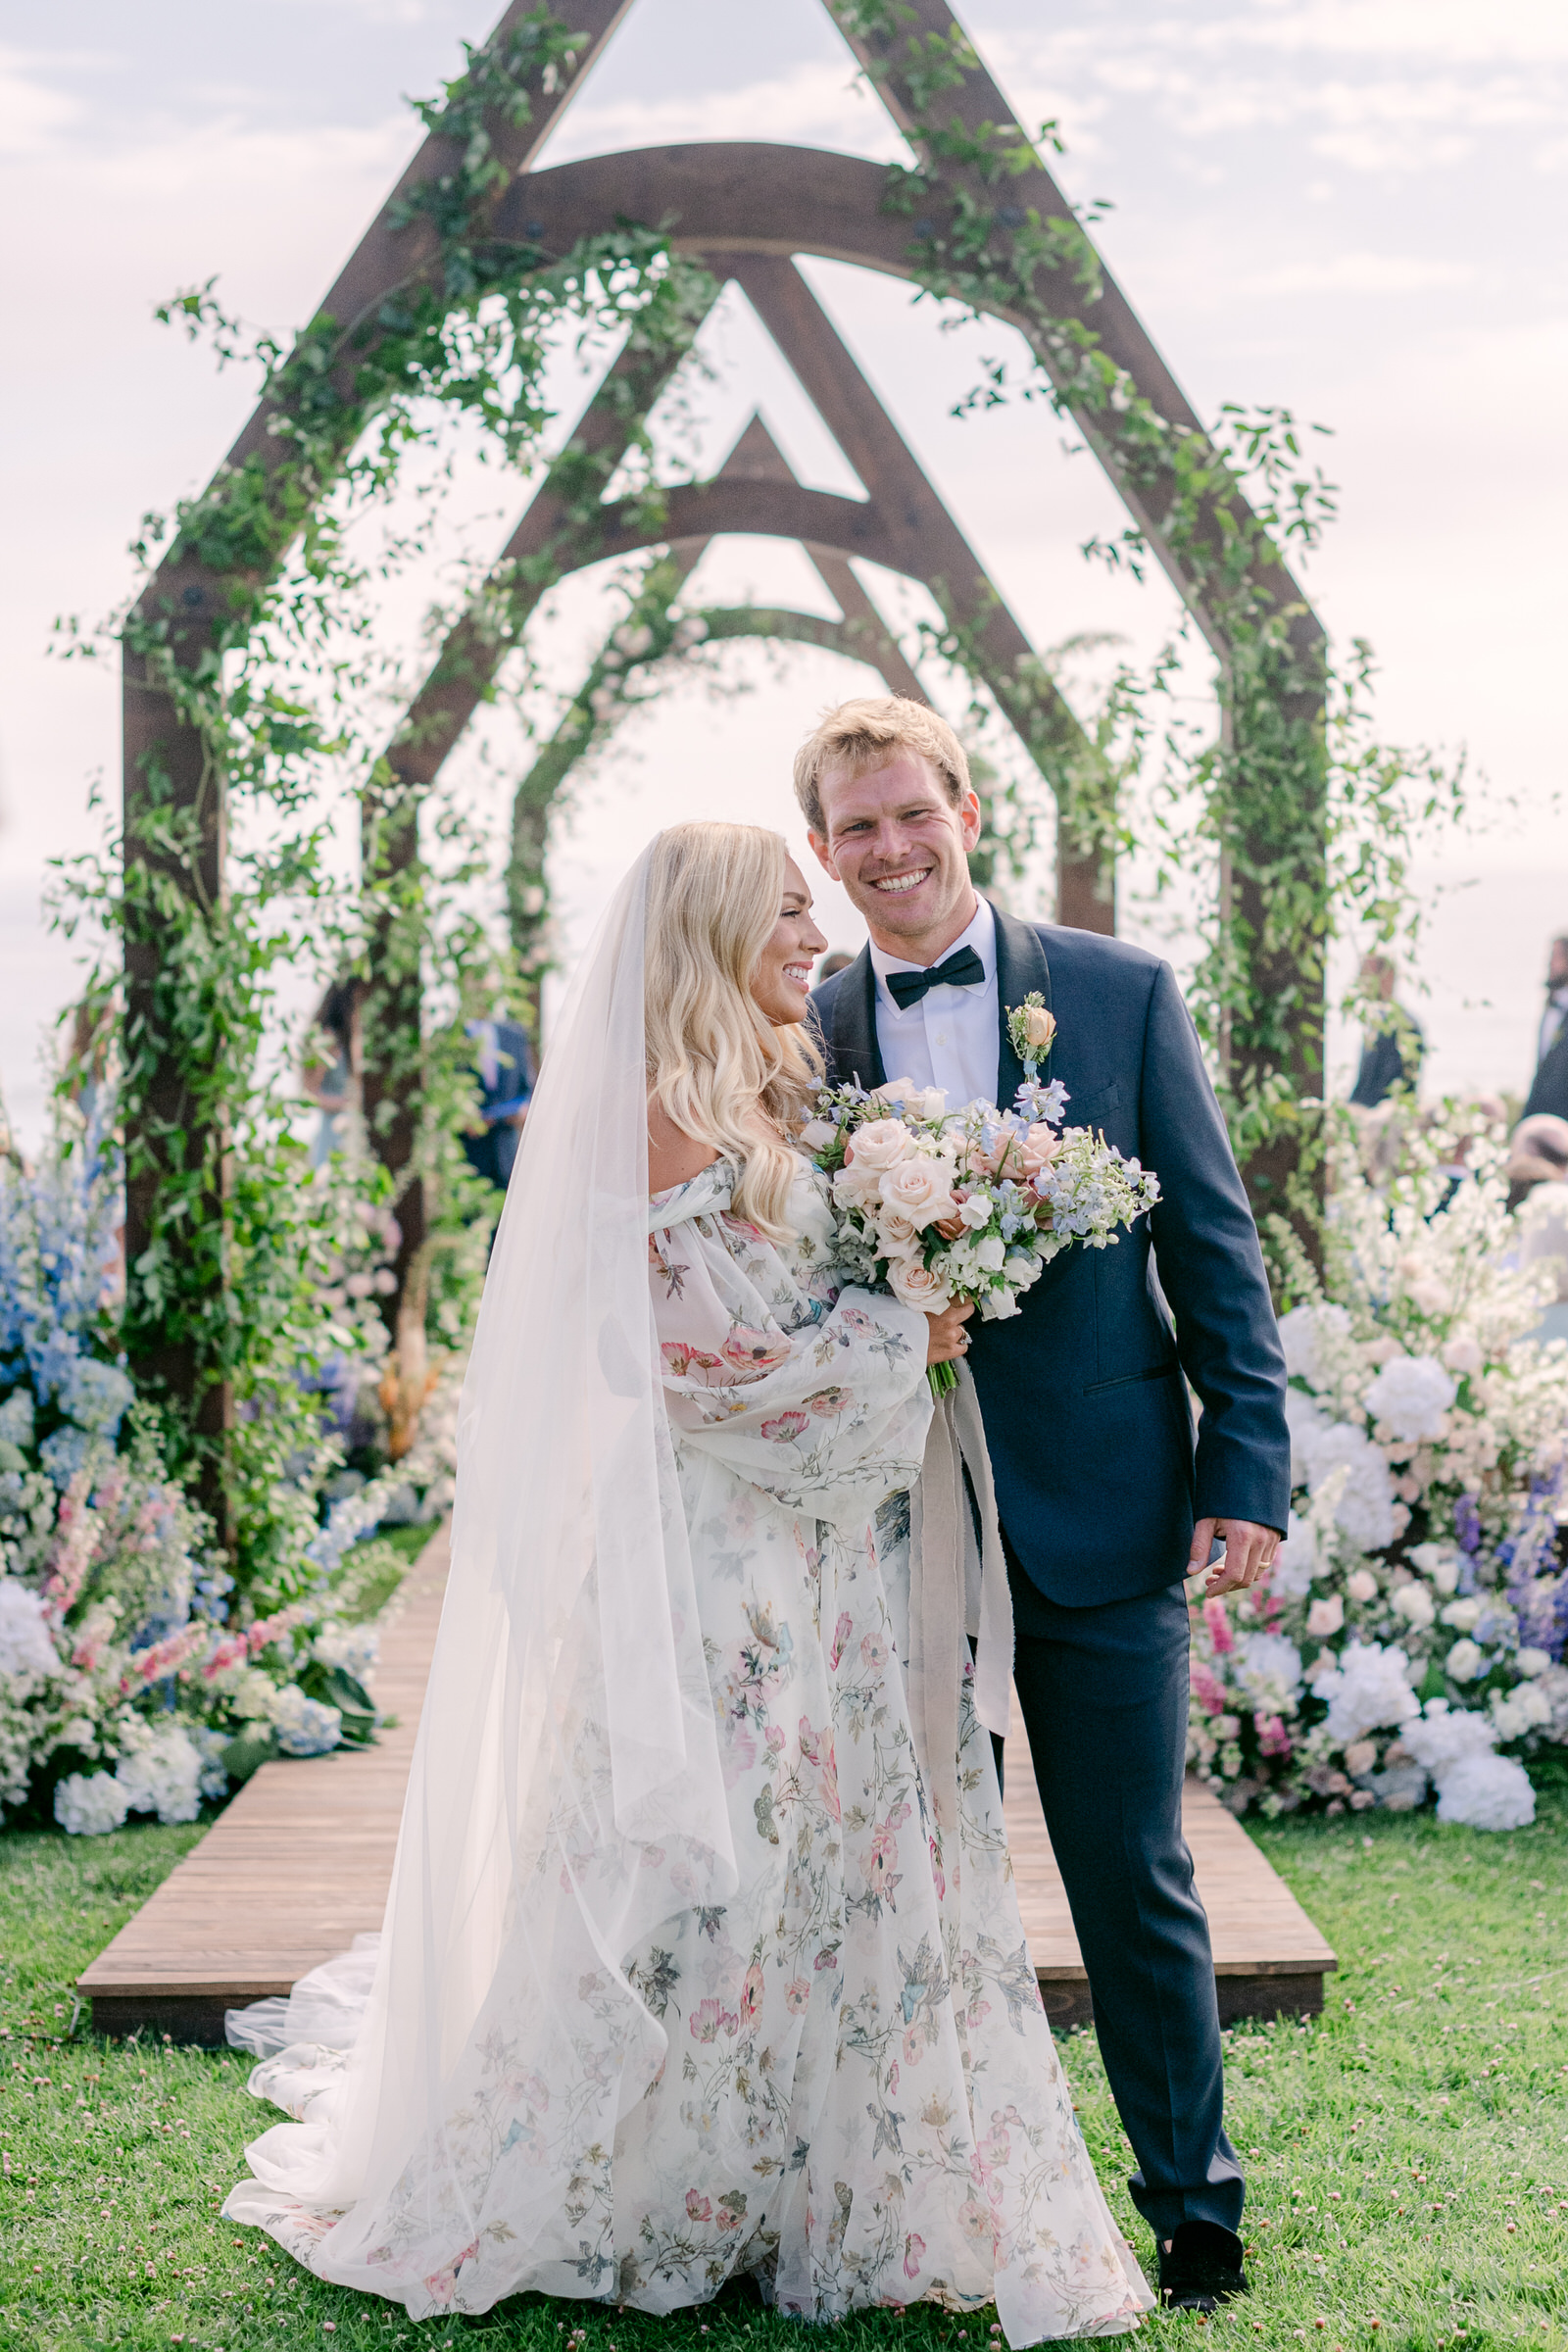 Get To Know The 9 Wedding Planners Behind The Most Stunning, High